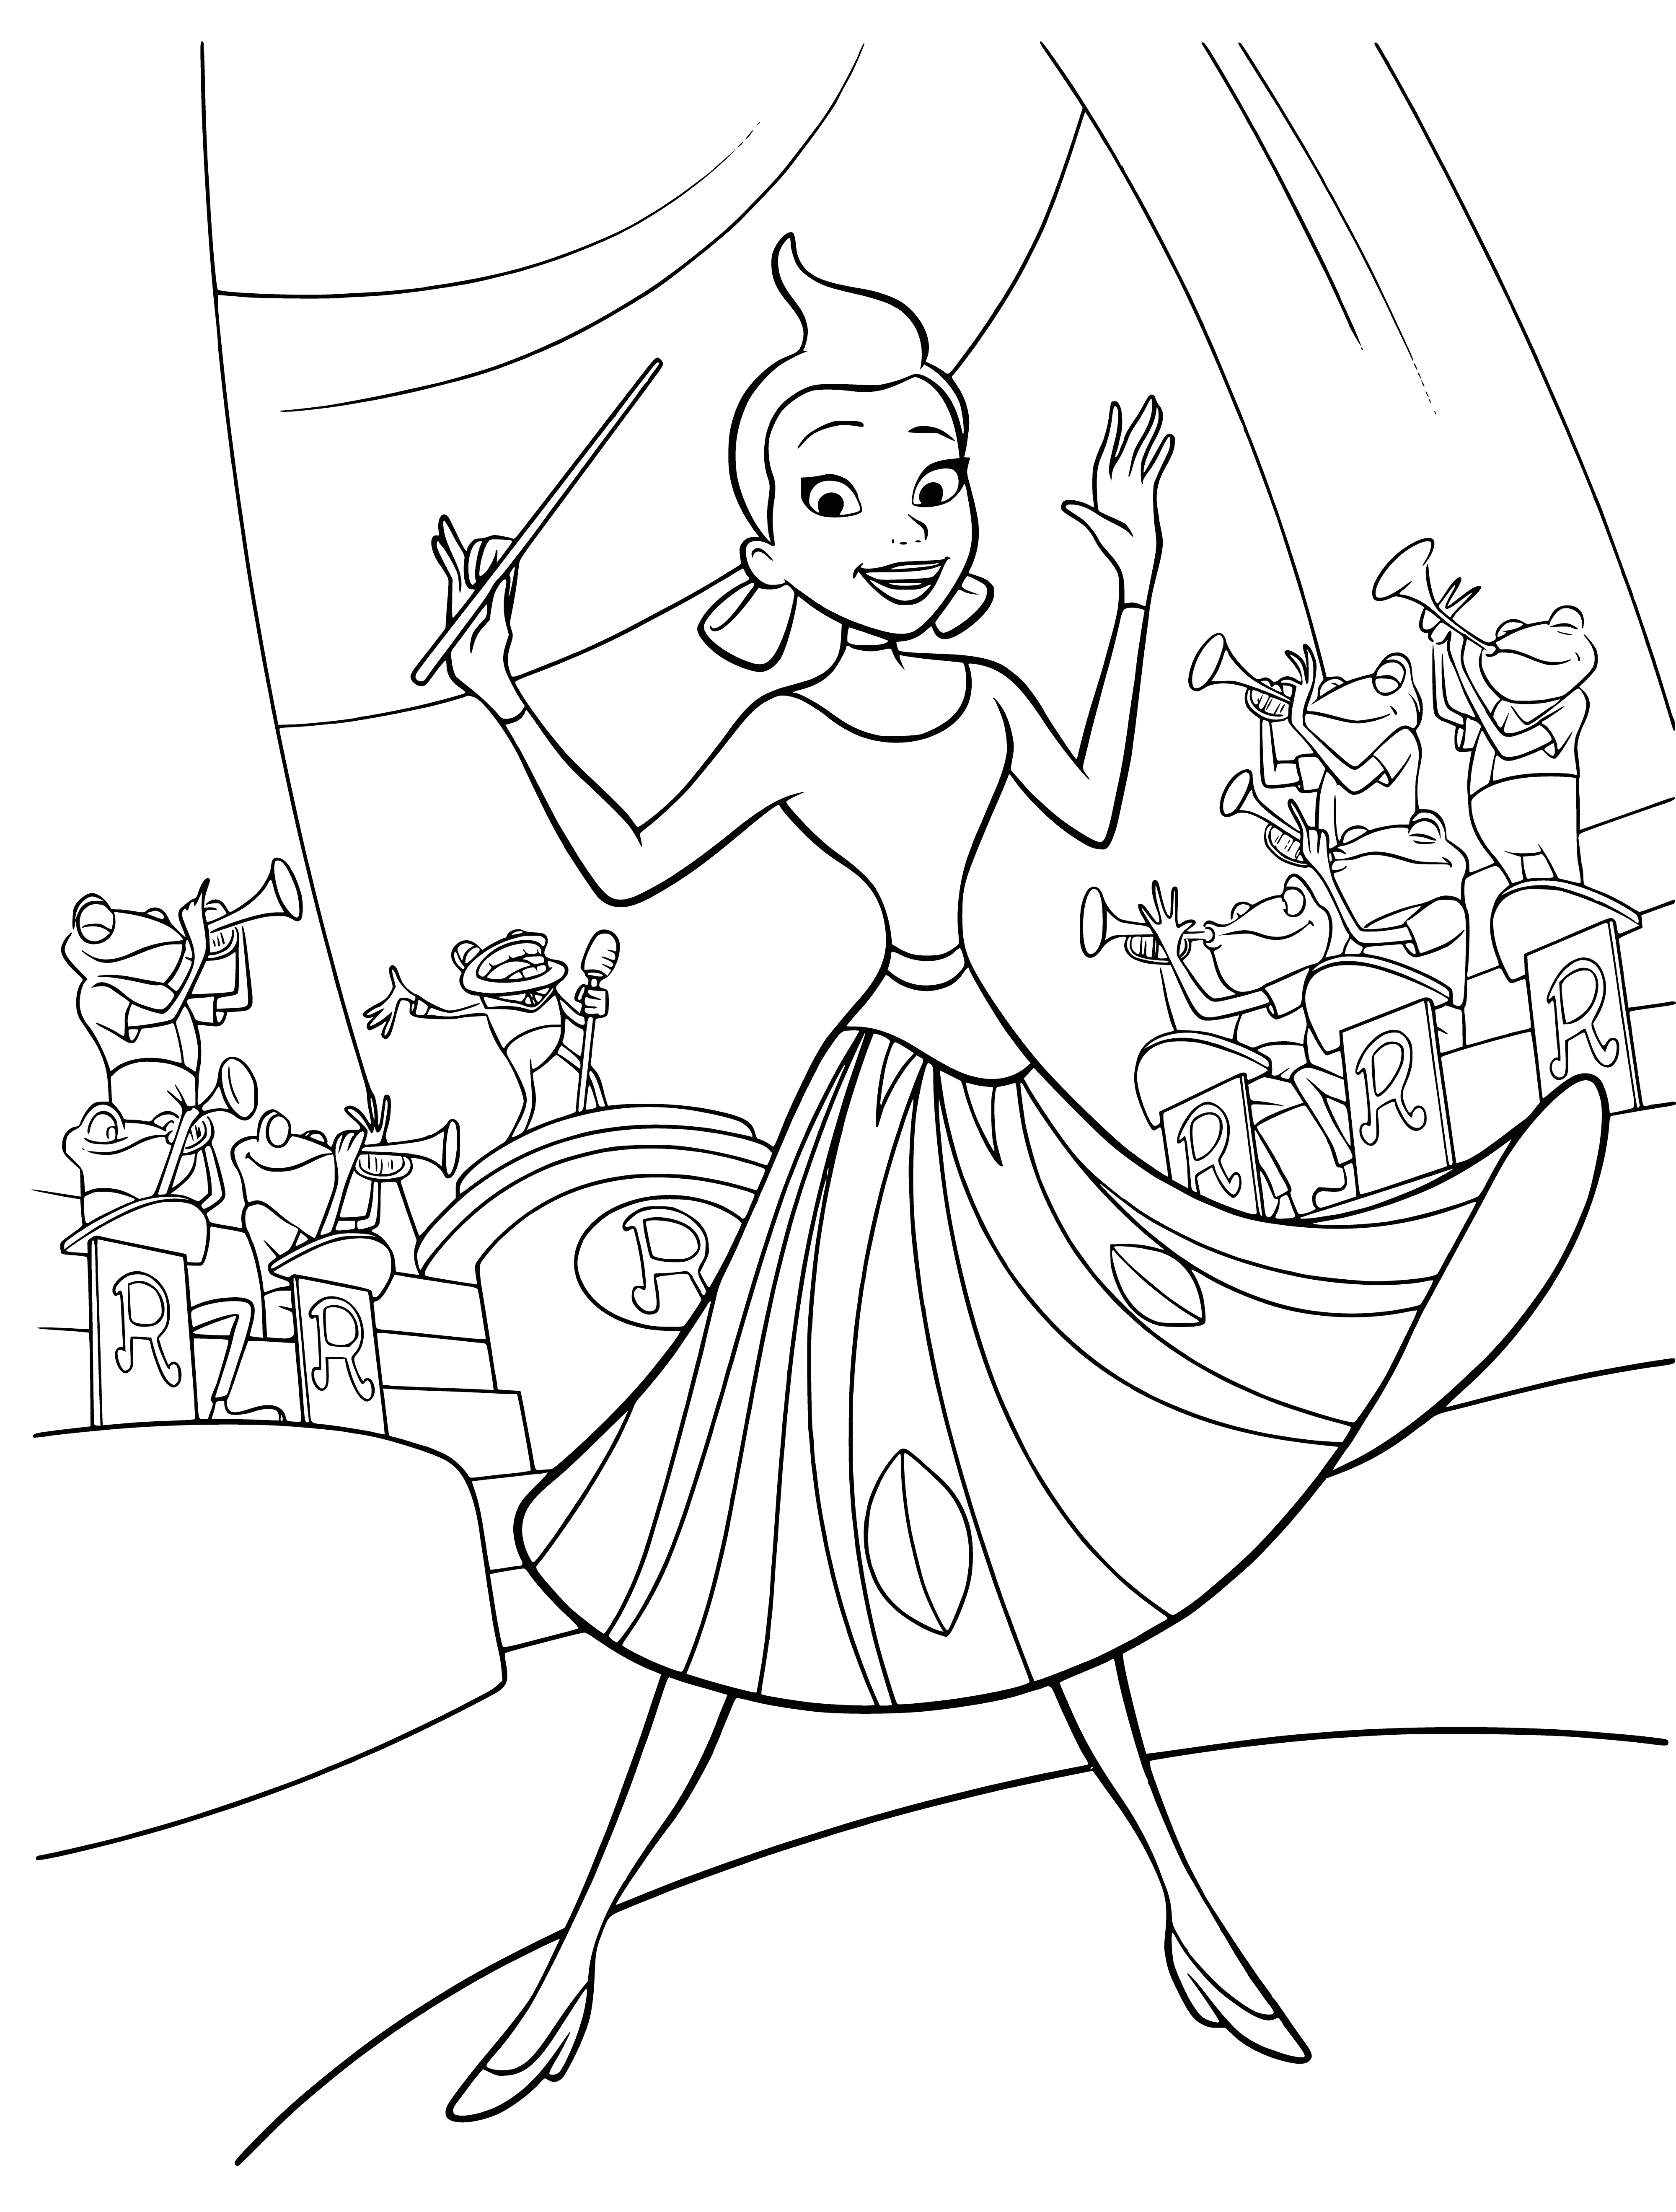 Frog band coloring page